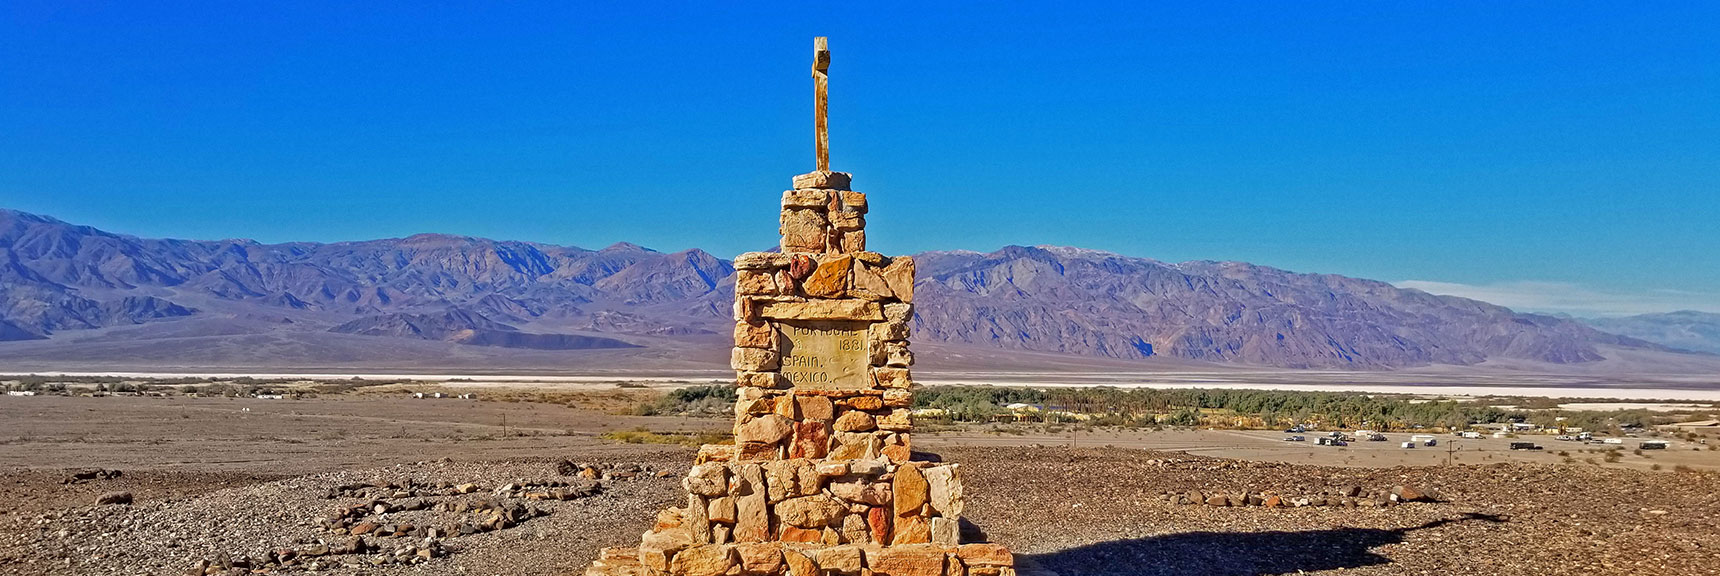 Memorial with Furnace Creek Ranch and Panamint Range Backdrop | Tea House & Table Rock Circuit | Furnace Creek | Death Valley National Park, California